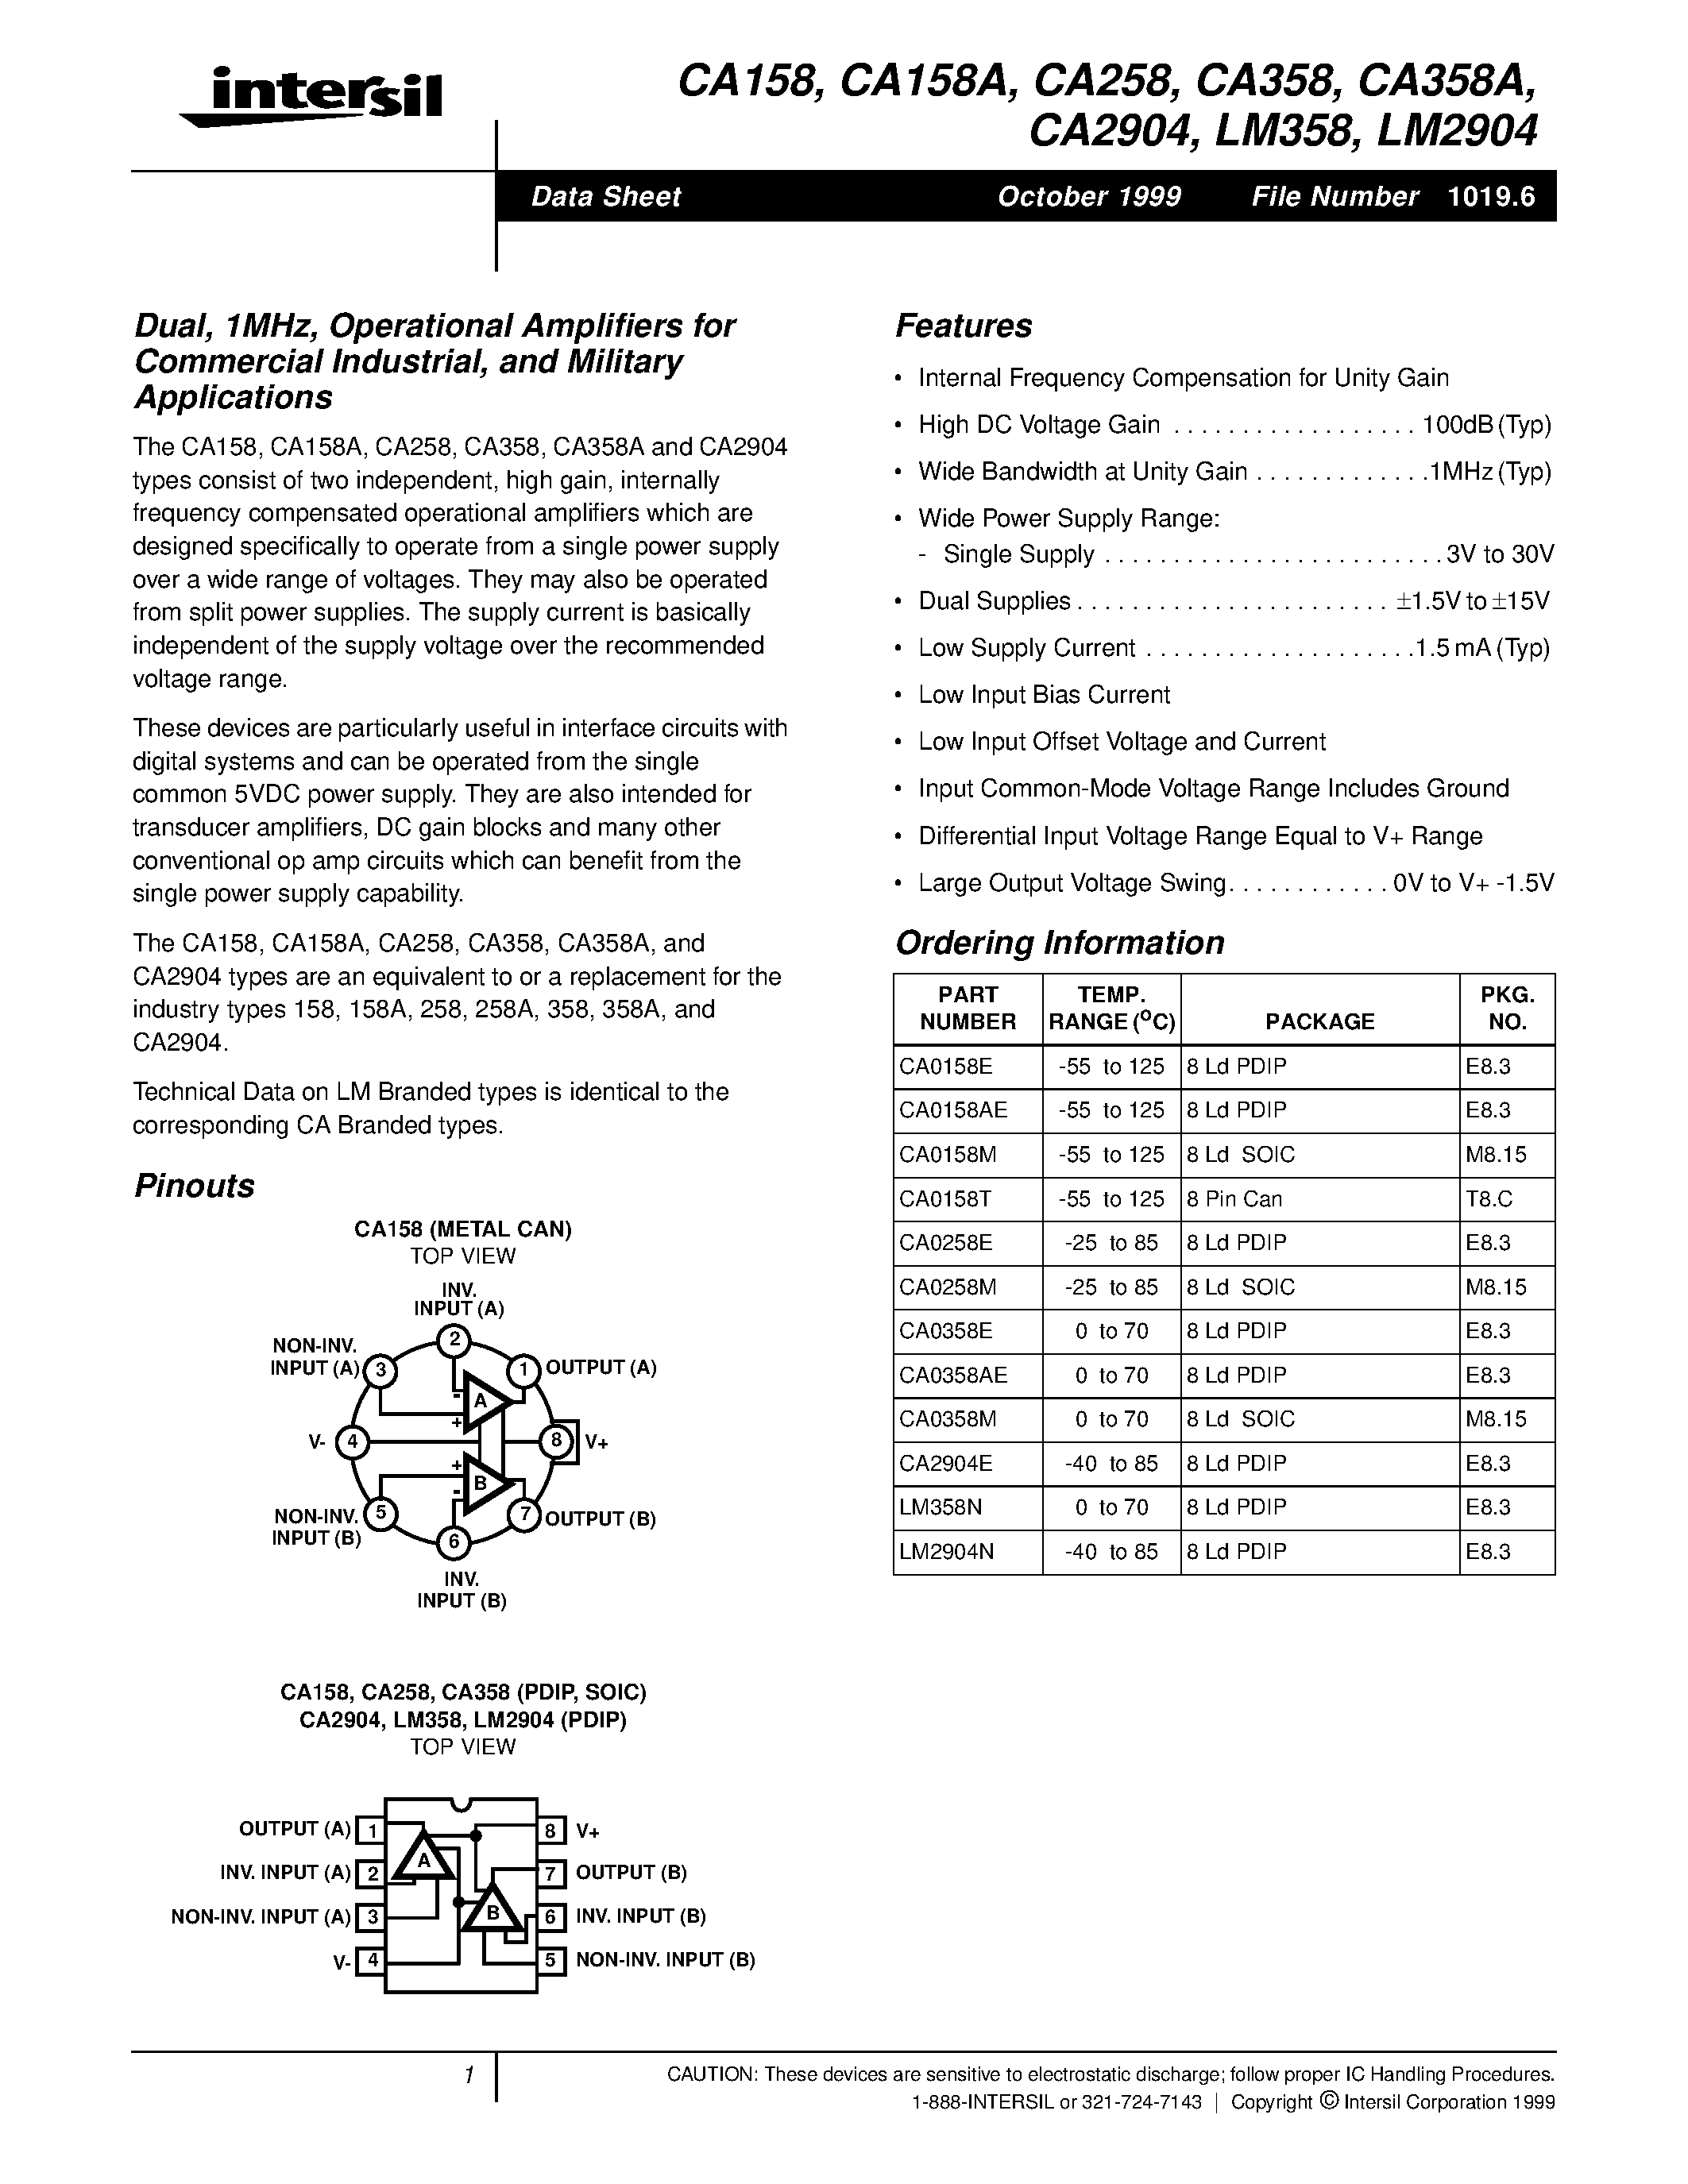 Datasheet LM2904 - Operational Amplifiers page 1